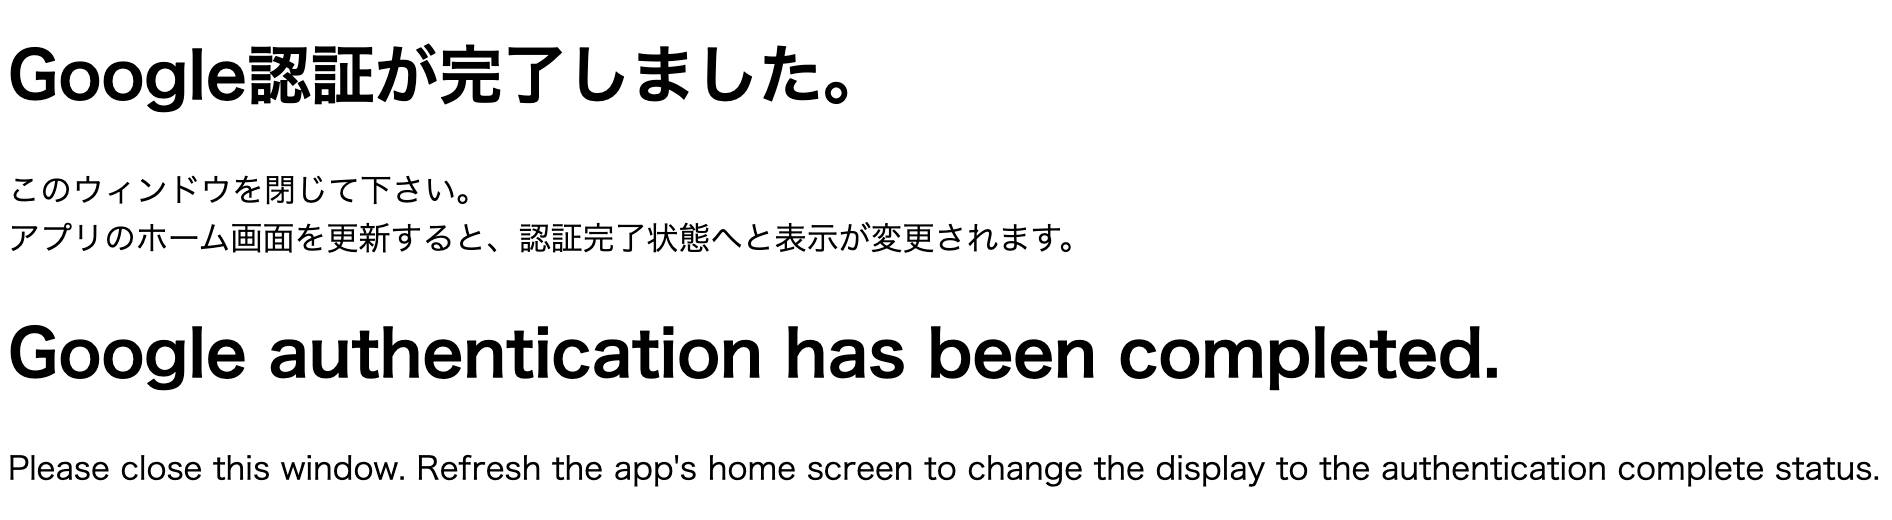 Google認証完了_Google_authentication_completed.png